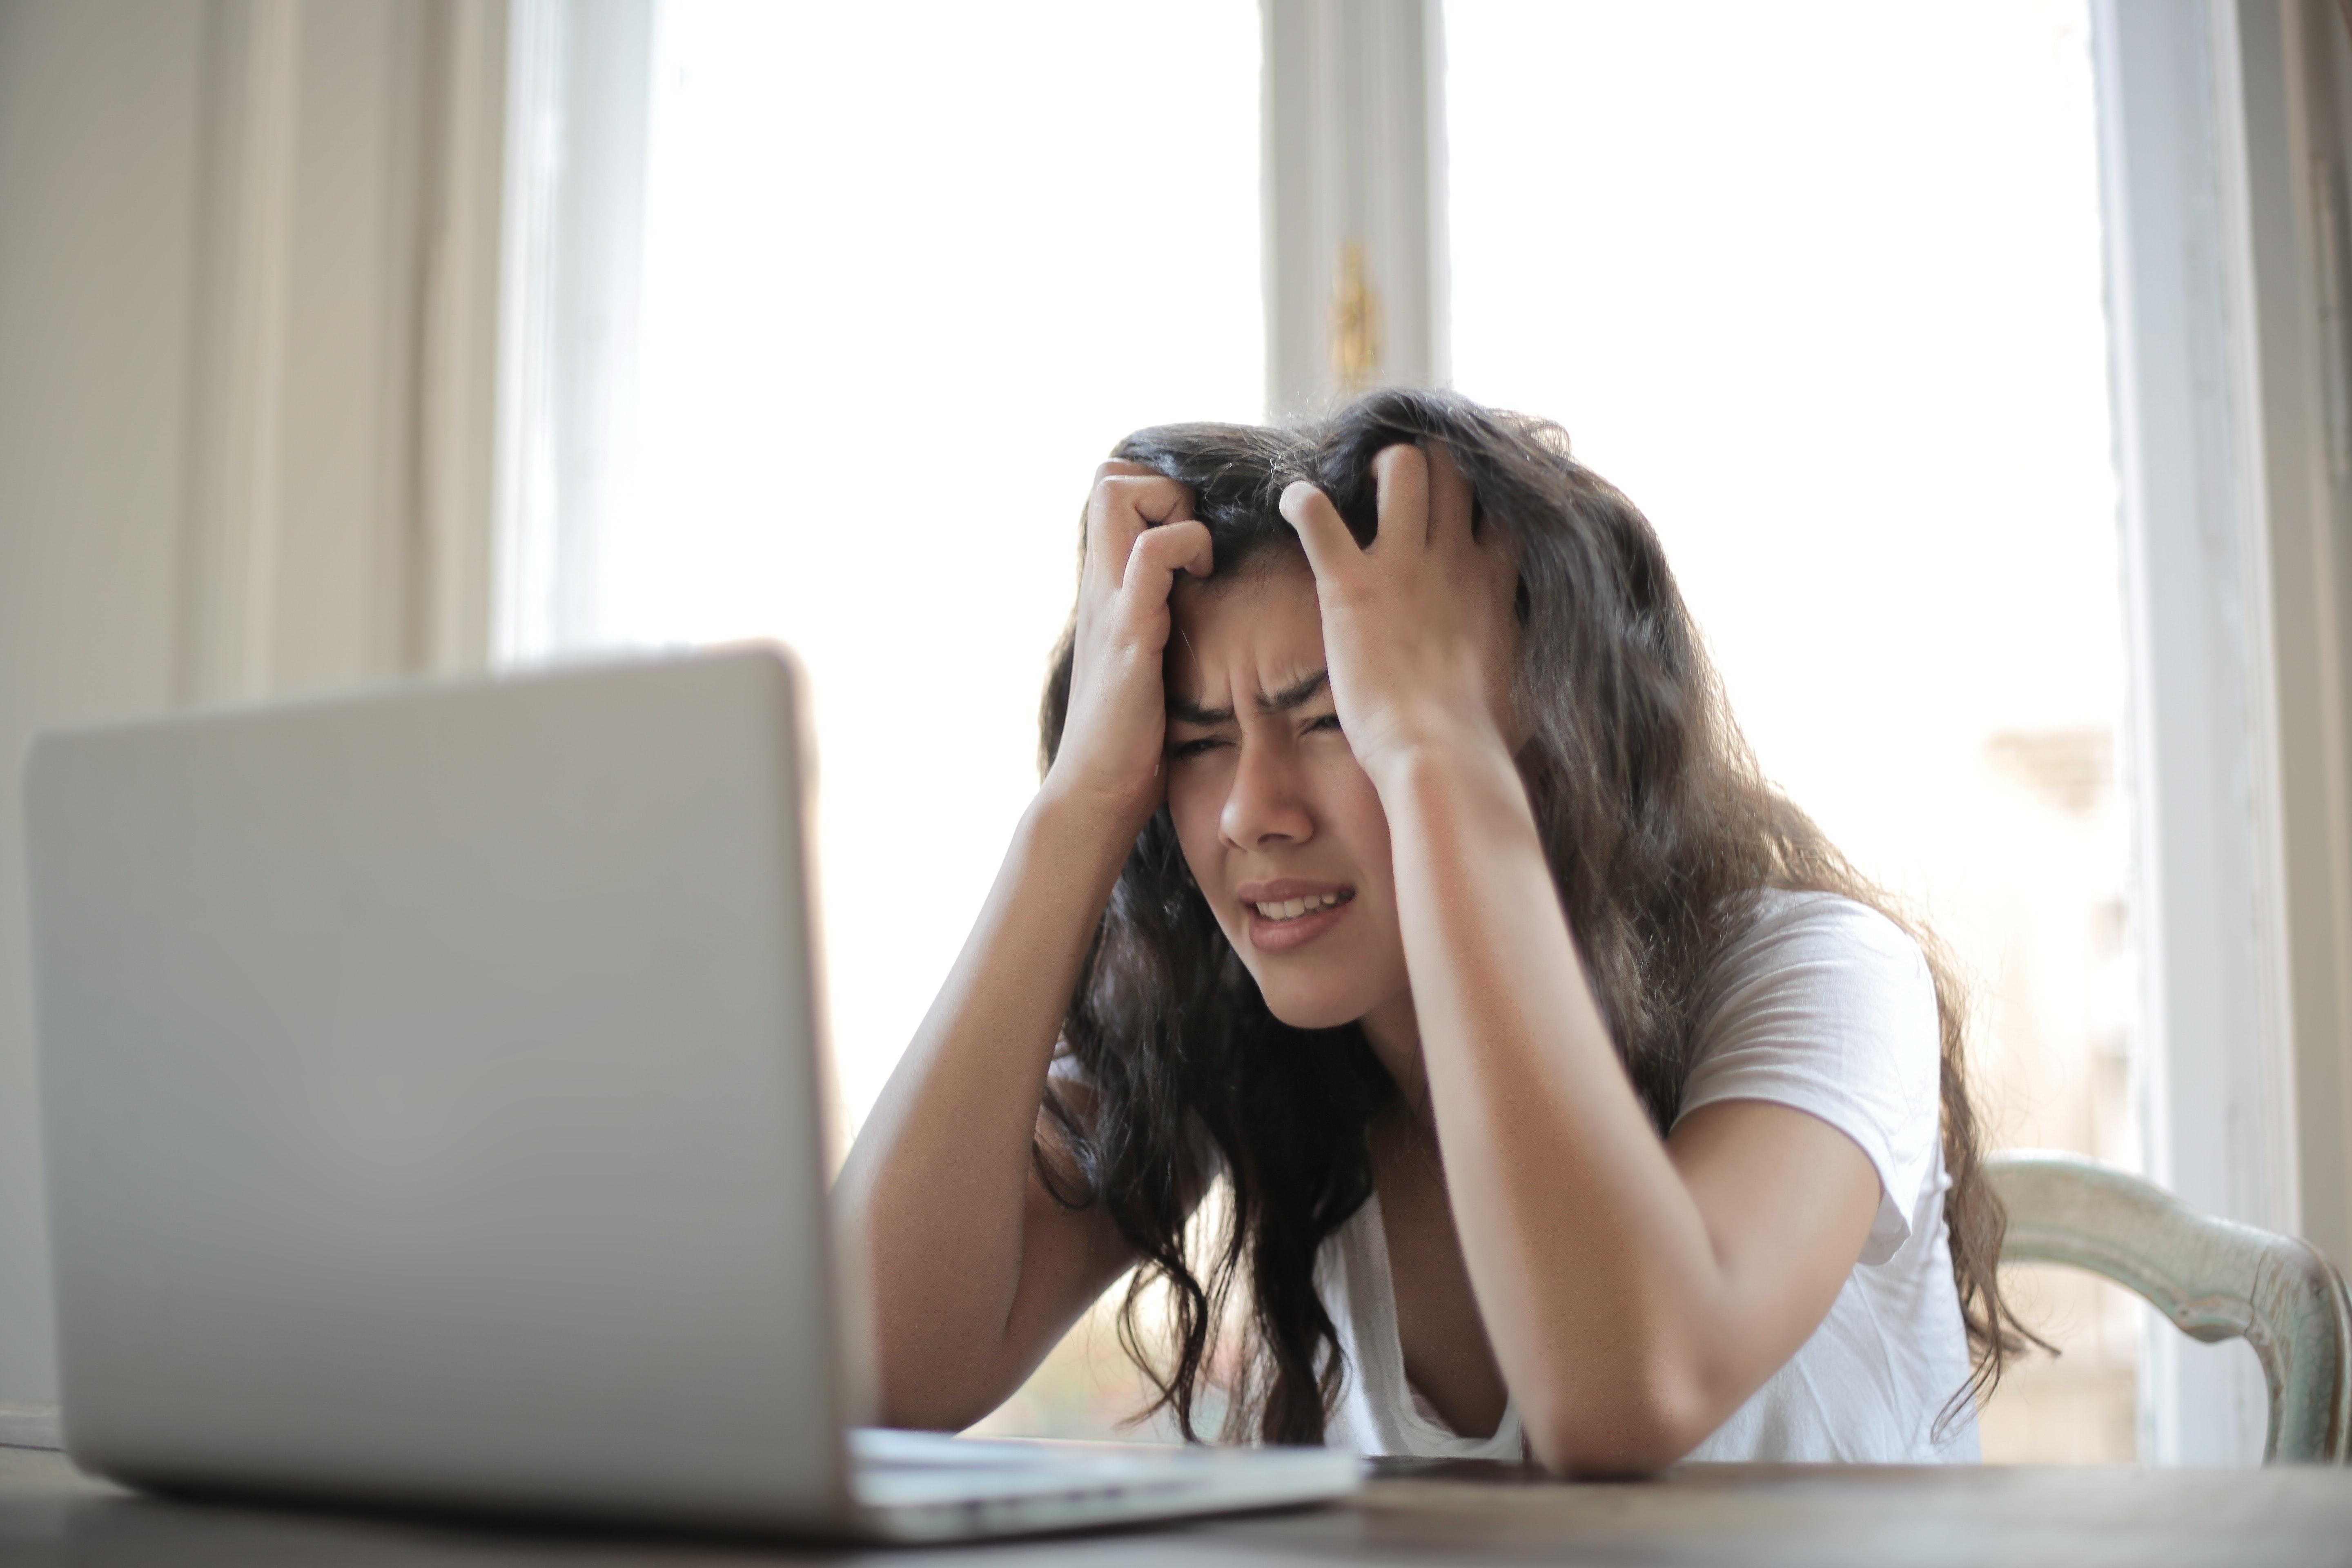 Woman looking frustrated while using a laptop